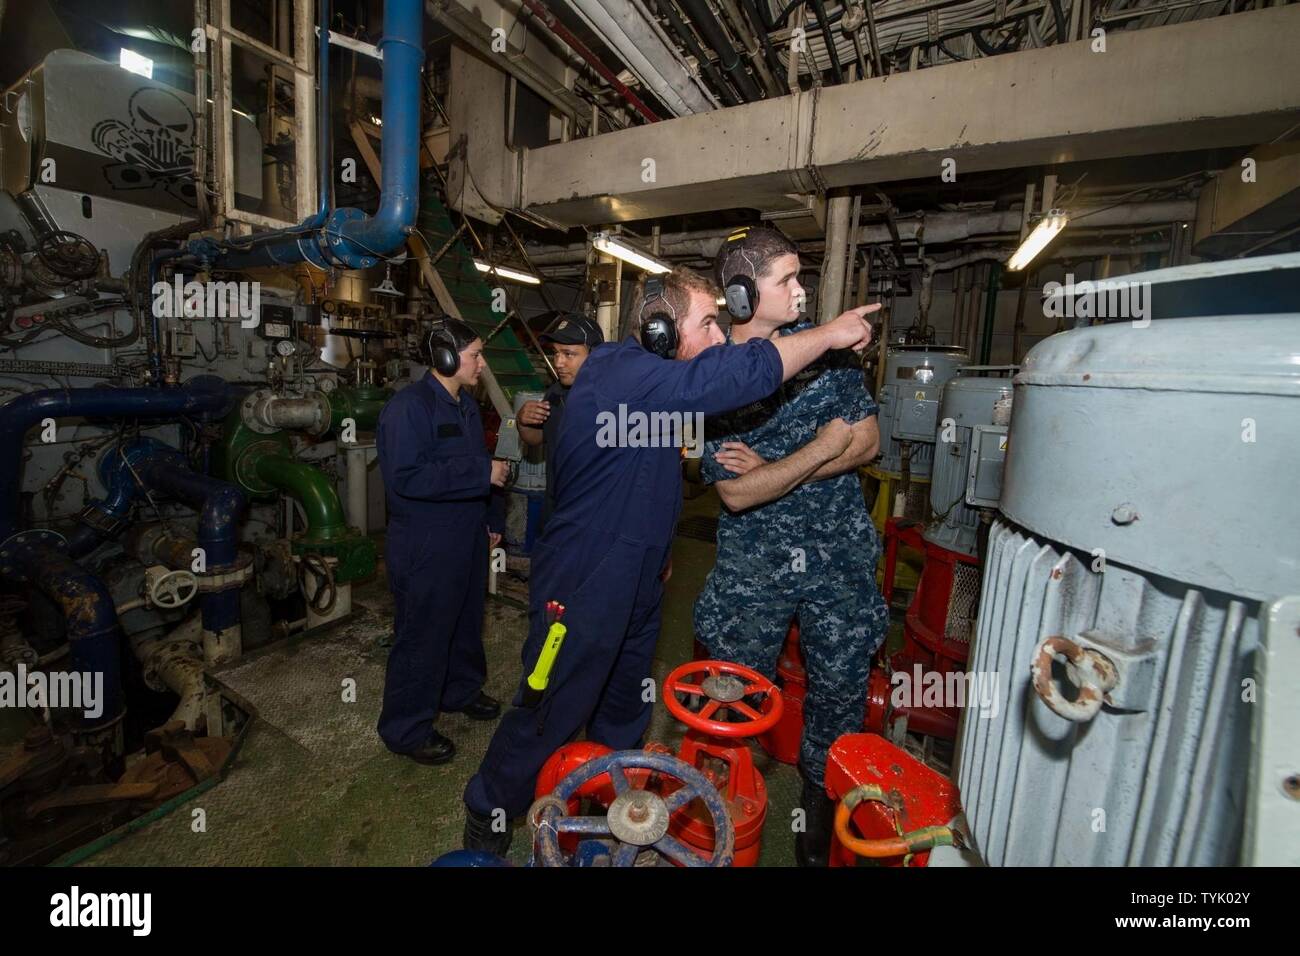 OCEAN (Nov. 12, 2016) – Arleigh Burke-class guided-missile destroyer USS Sampson (DDG 102) sailors Ens. Marianne Estrada, from Las Vegas, Nev., left, and Petty officer 3rd Class Brian Duhamel, from Palm Harbor, Fla., right, receive a tour of the ship engine space from Royal New Zealand Navy Sailors aboard Her Majesty’s New Zealand Ship Endeavour. Sampson will report to U.S. Third Fleet, headquartered in San Diego, while deployed to the Western Pacific as part of the U.S. Pacific Fleet-led initiative to extend the command and control functions of Third Fleet into the region. Stock Photo